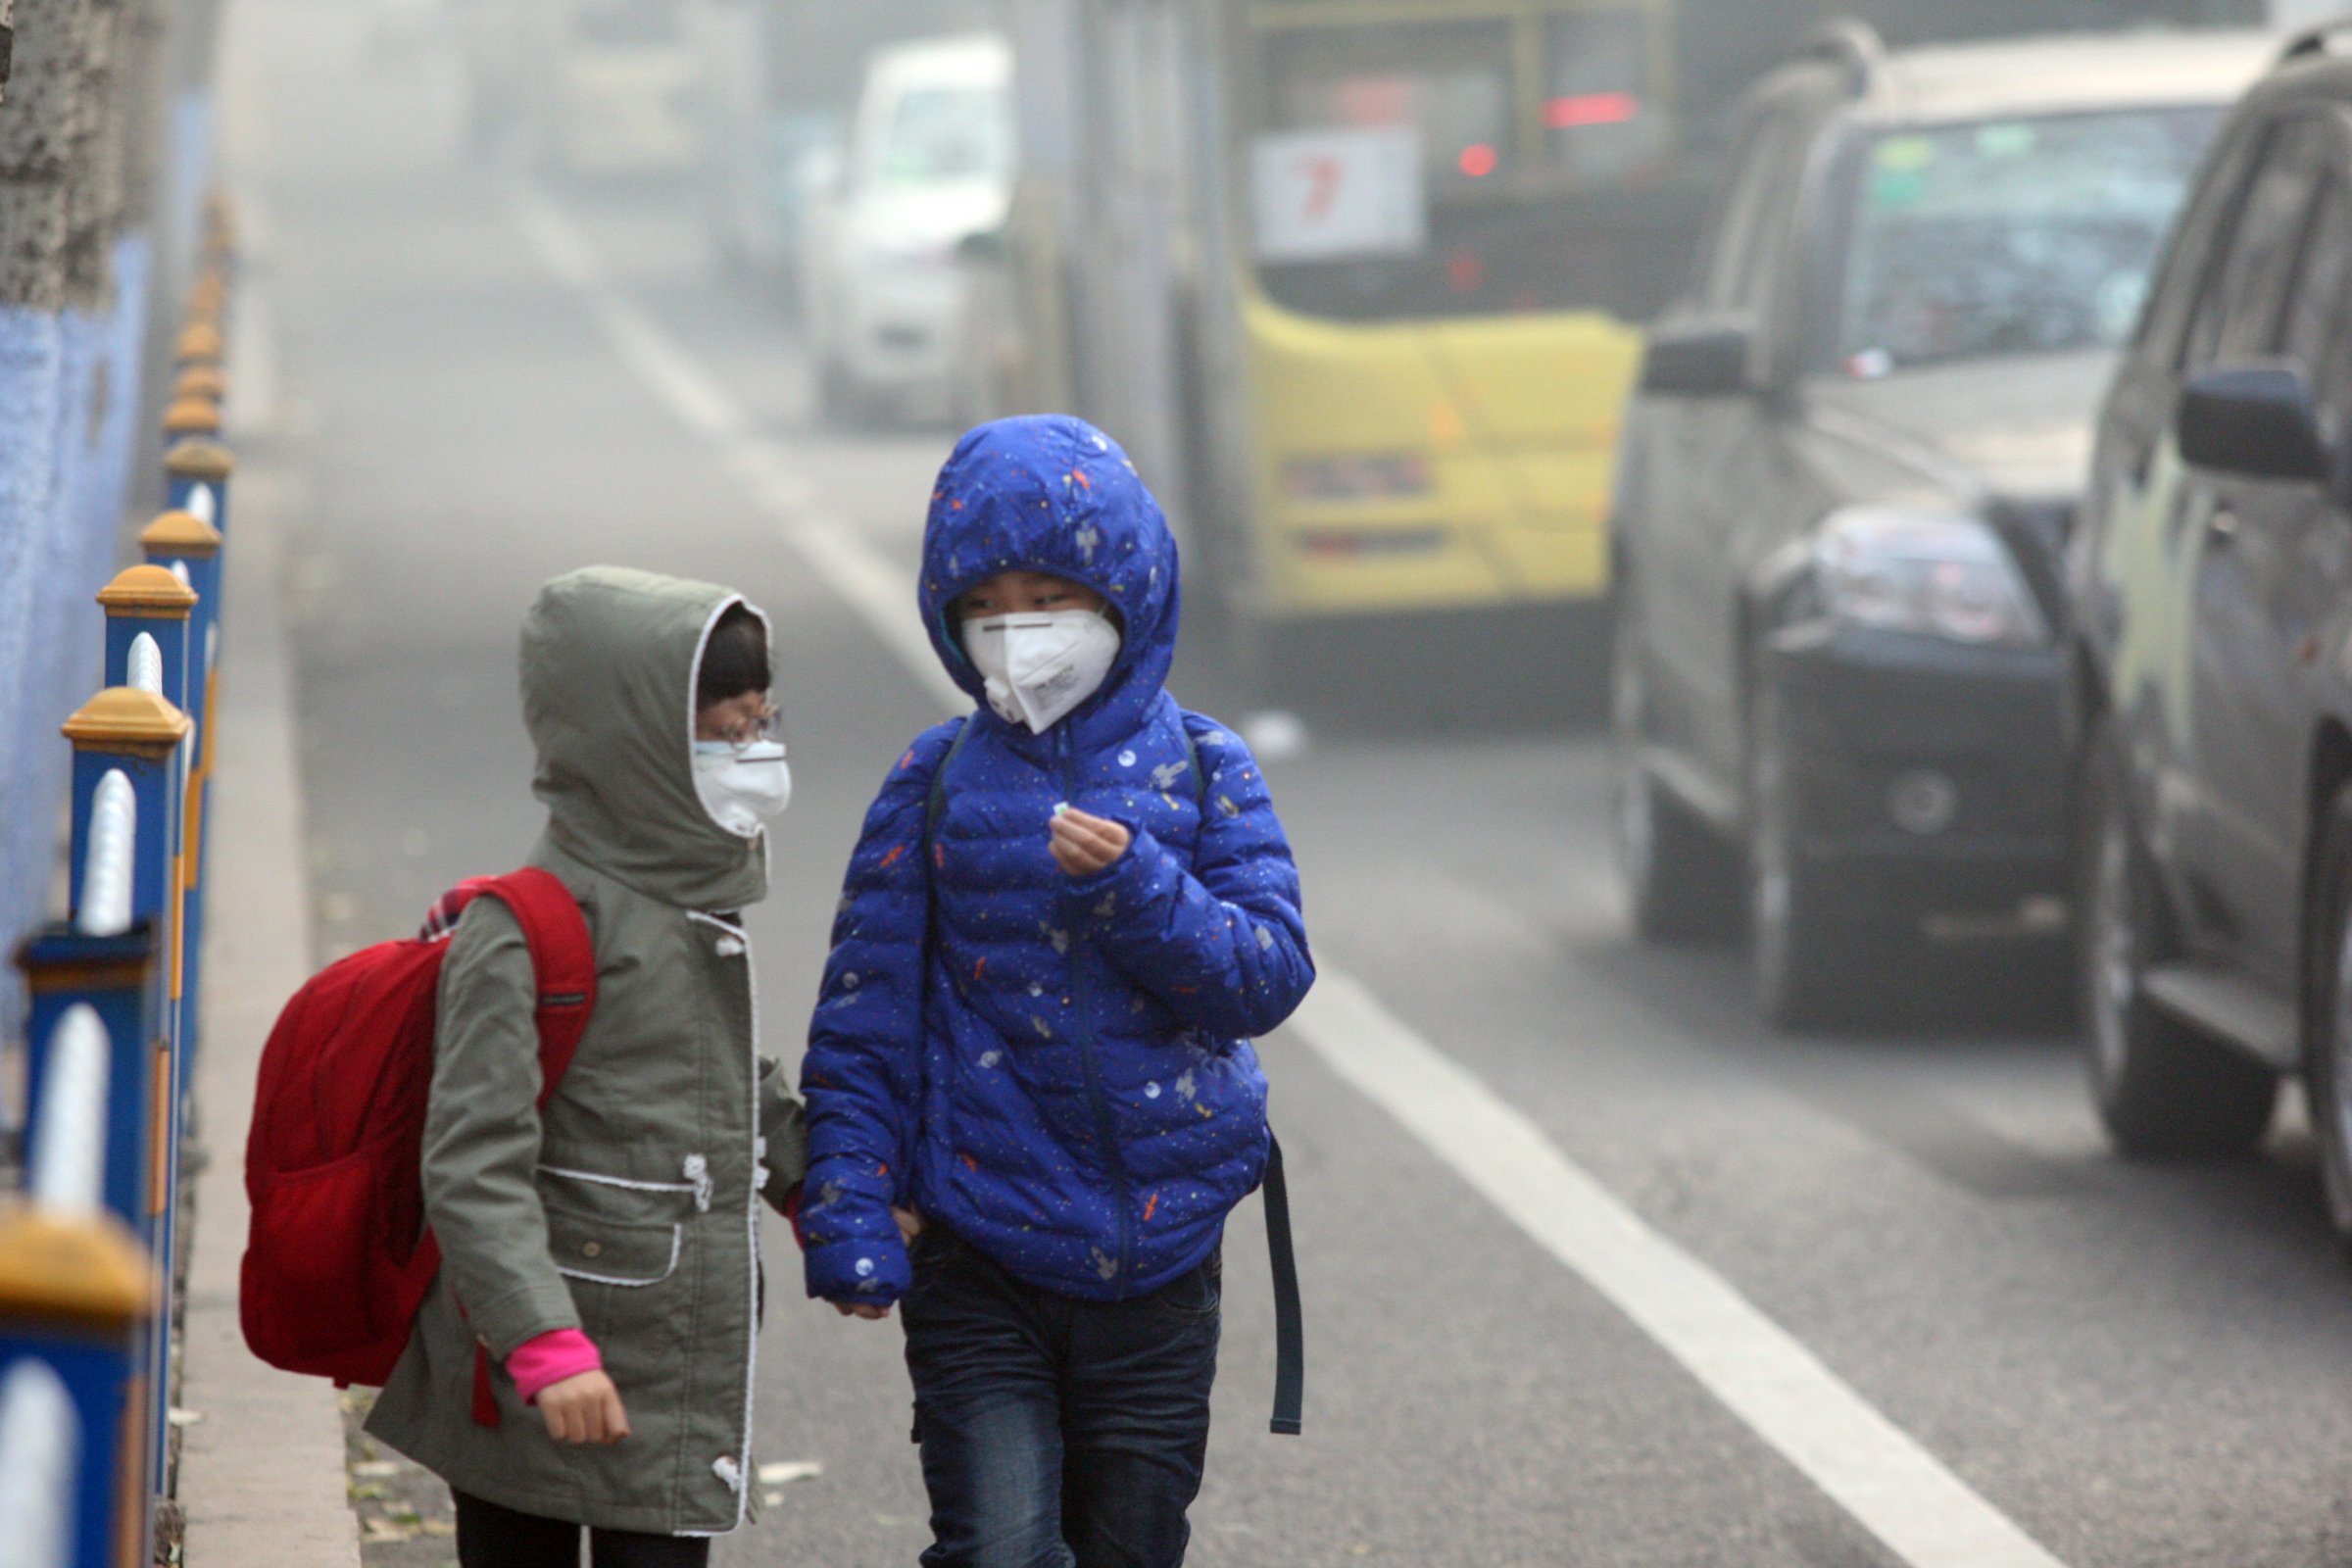 HARBIN, CHINA - NOVEMBER 03: (CHINA OUT) Two children wearing face masks walk in heavy smog on November 3, 2015 in Harbin, Heilongjiang Province of China. Heavy smog stroke northeast China with the visibility in parts of cities reaching less than 50 meters. (Photo by ChinaFotoPress)***_***